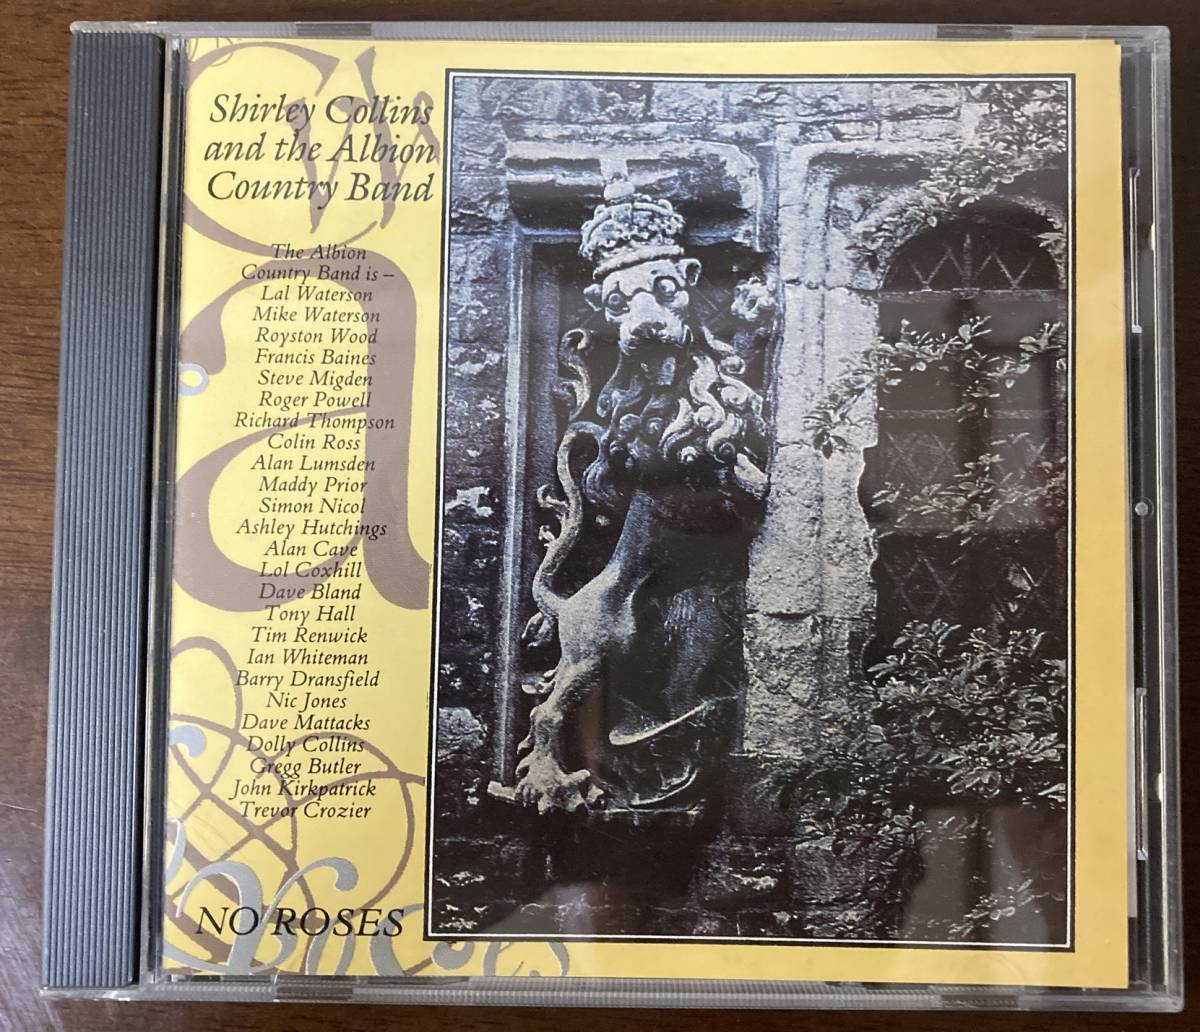 ＵＫ盤 Shirley Collins And The Albion Country Band [No Roses] シャーリー・コリンズ ＣＤ_画像1